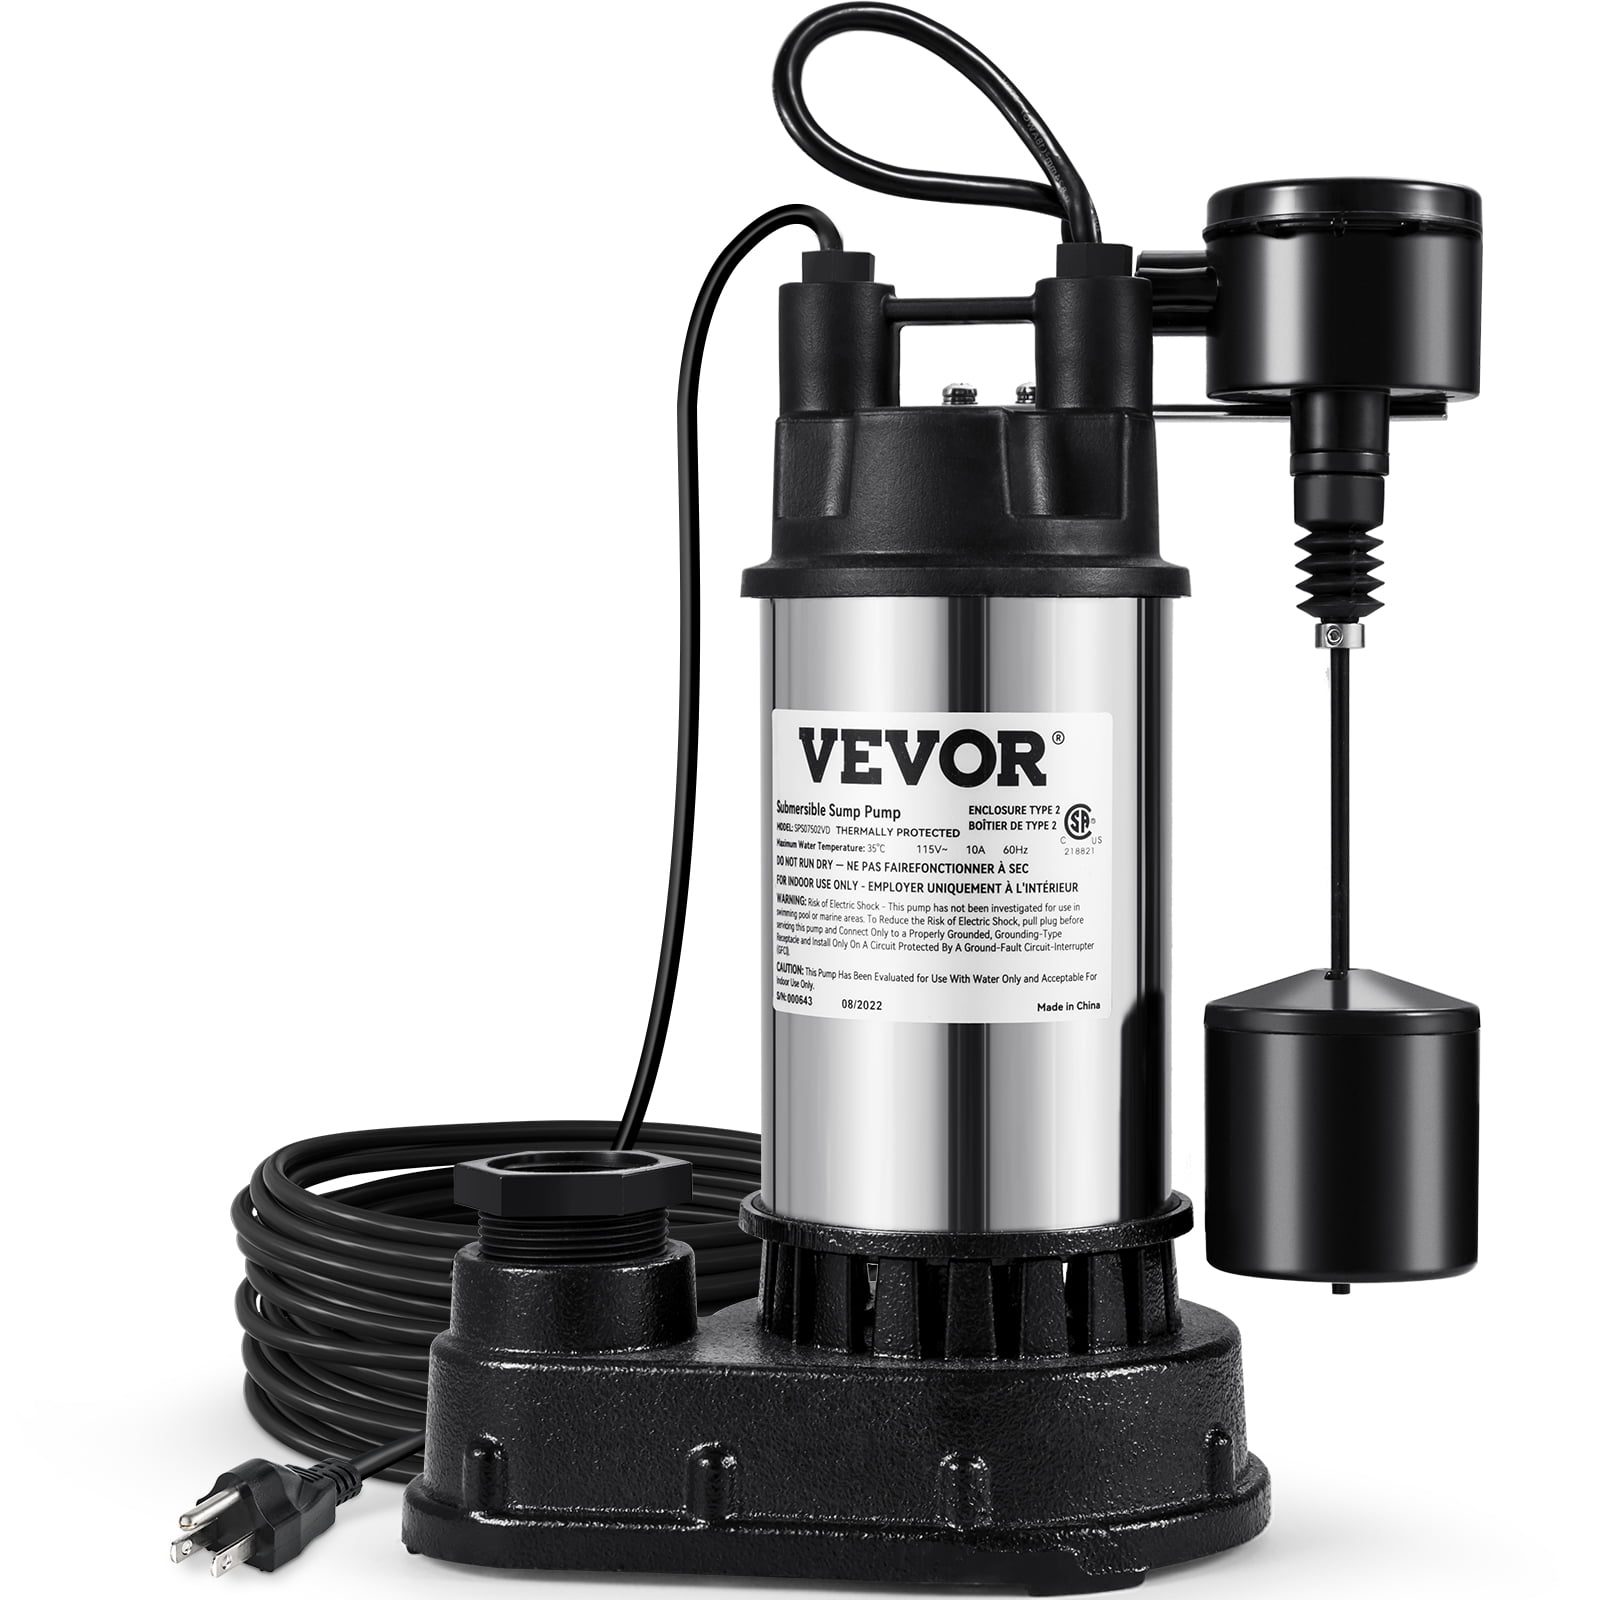 VEVOR Sump Pump, 1.5 HP 6000 GPH, Submersible Cast Iron and